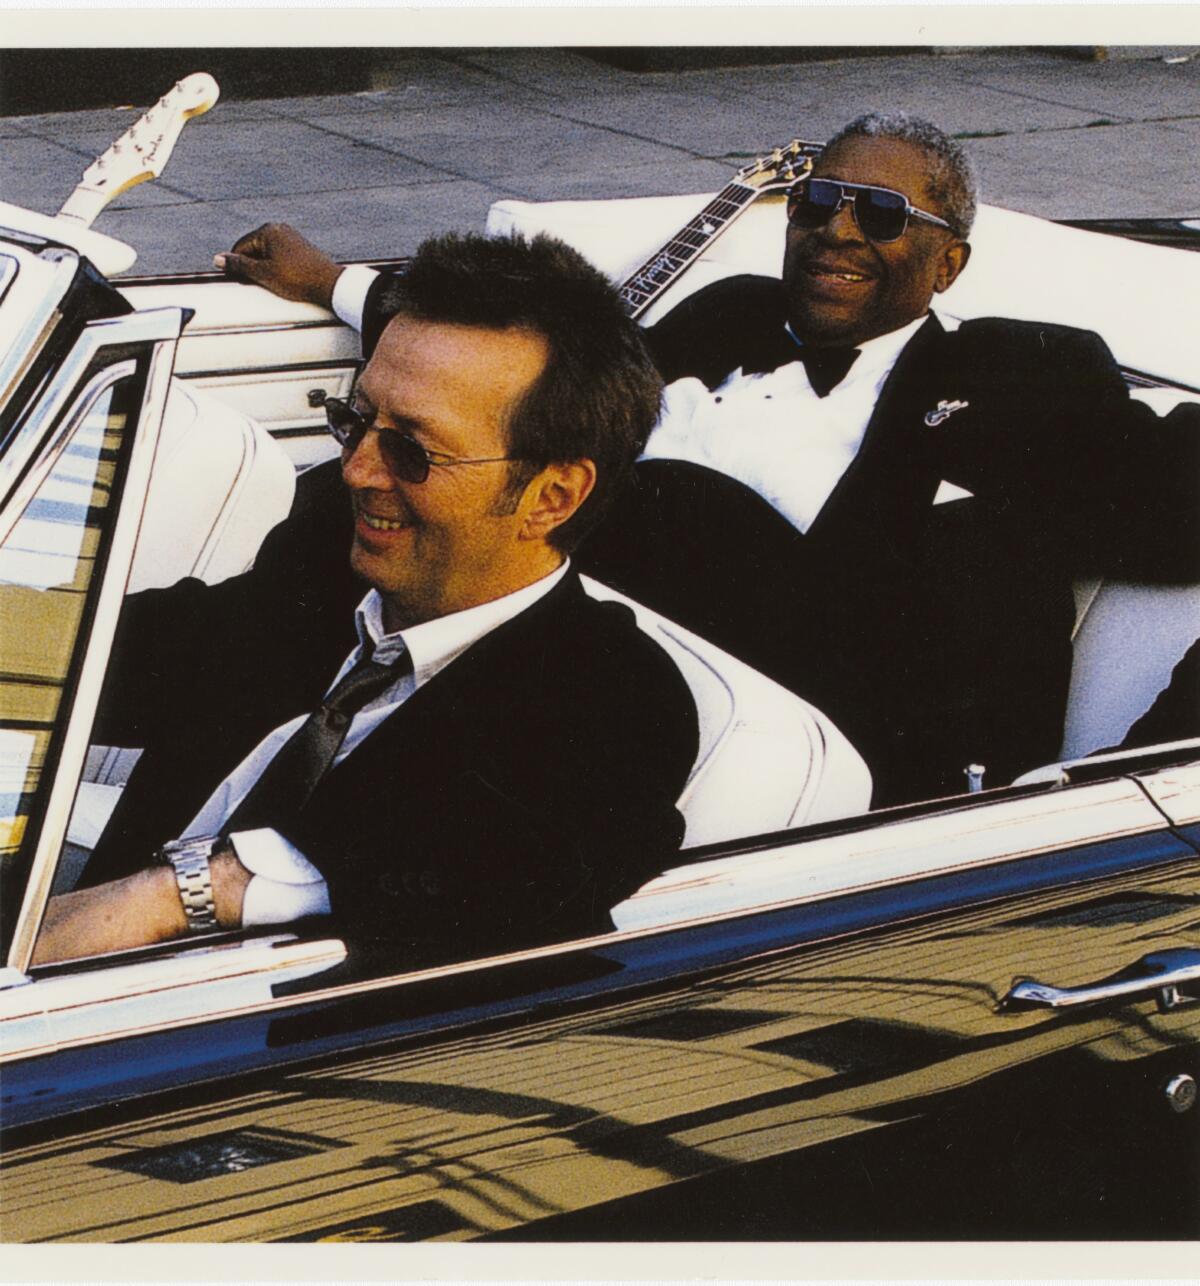 Eric Clapton and B.B. King pose for the cover of their Grammy Award-winning 2000 album, "Riding with the King."